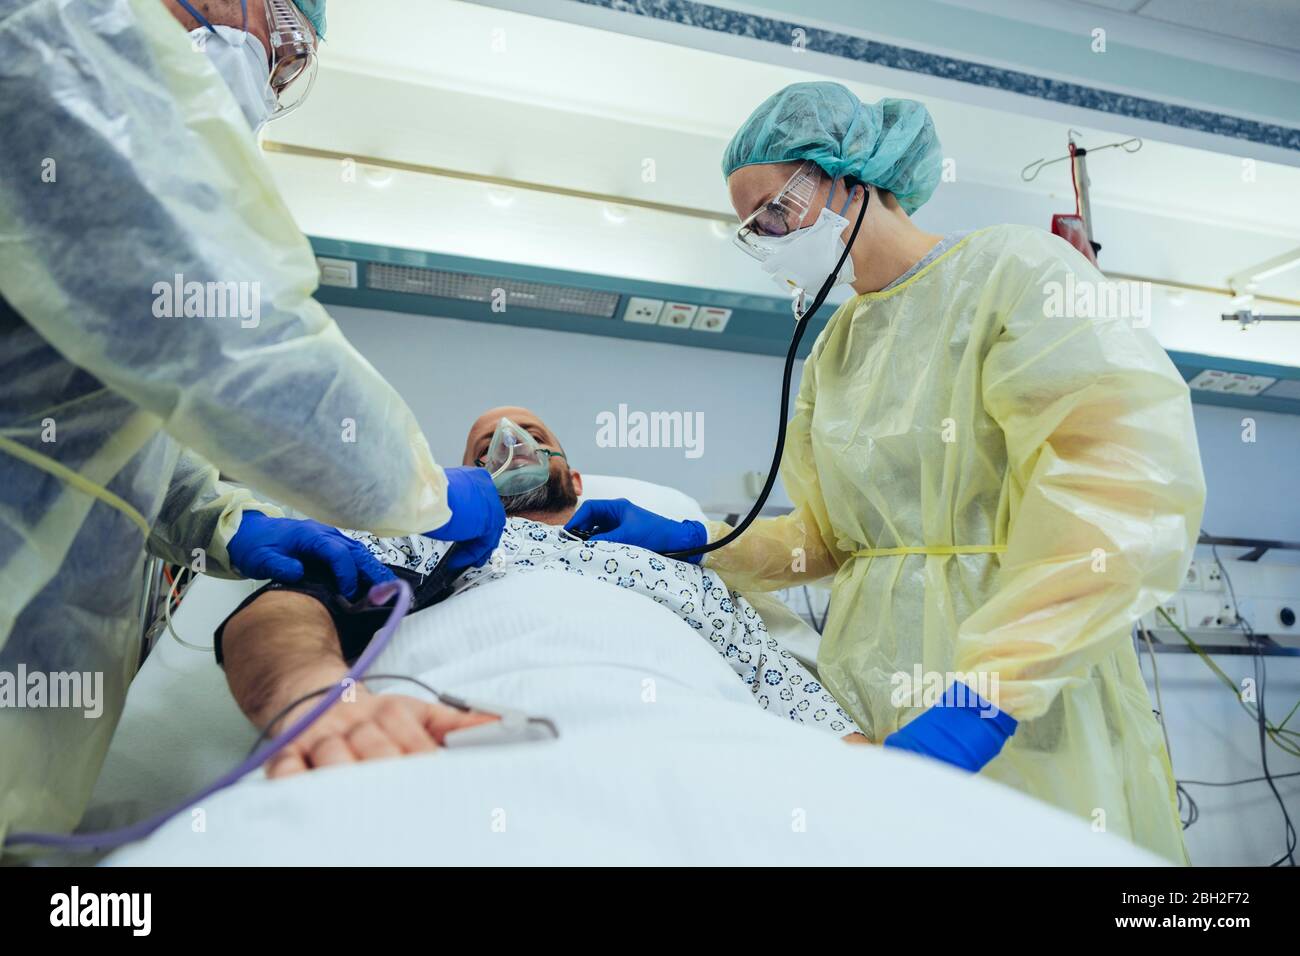 Doctors caring for patient in emergency care unit of a hospital with respiratory equipment Stock Photo